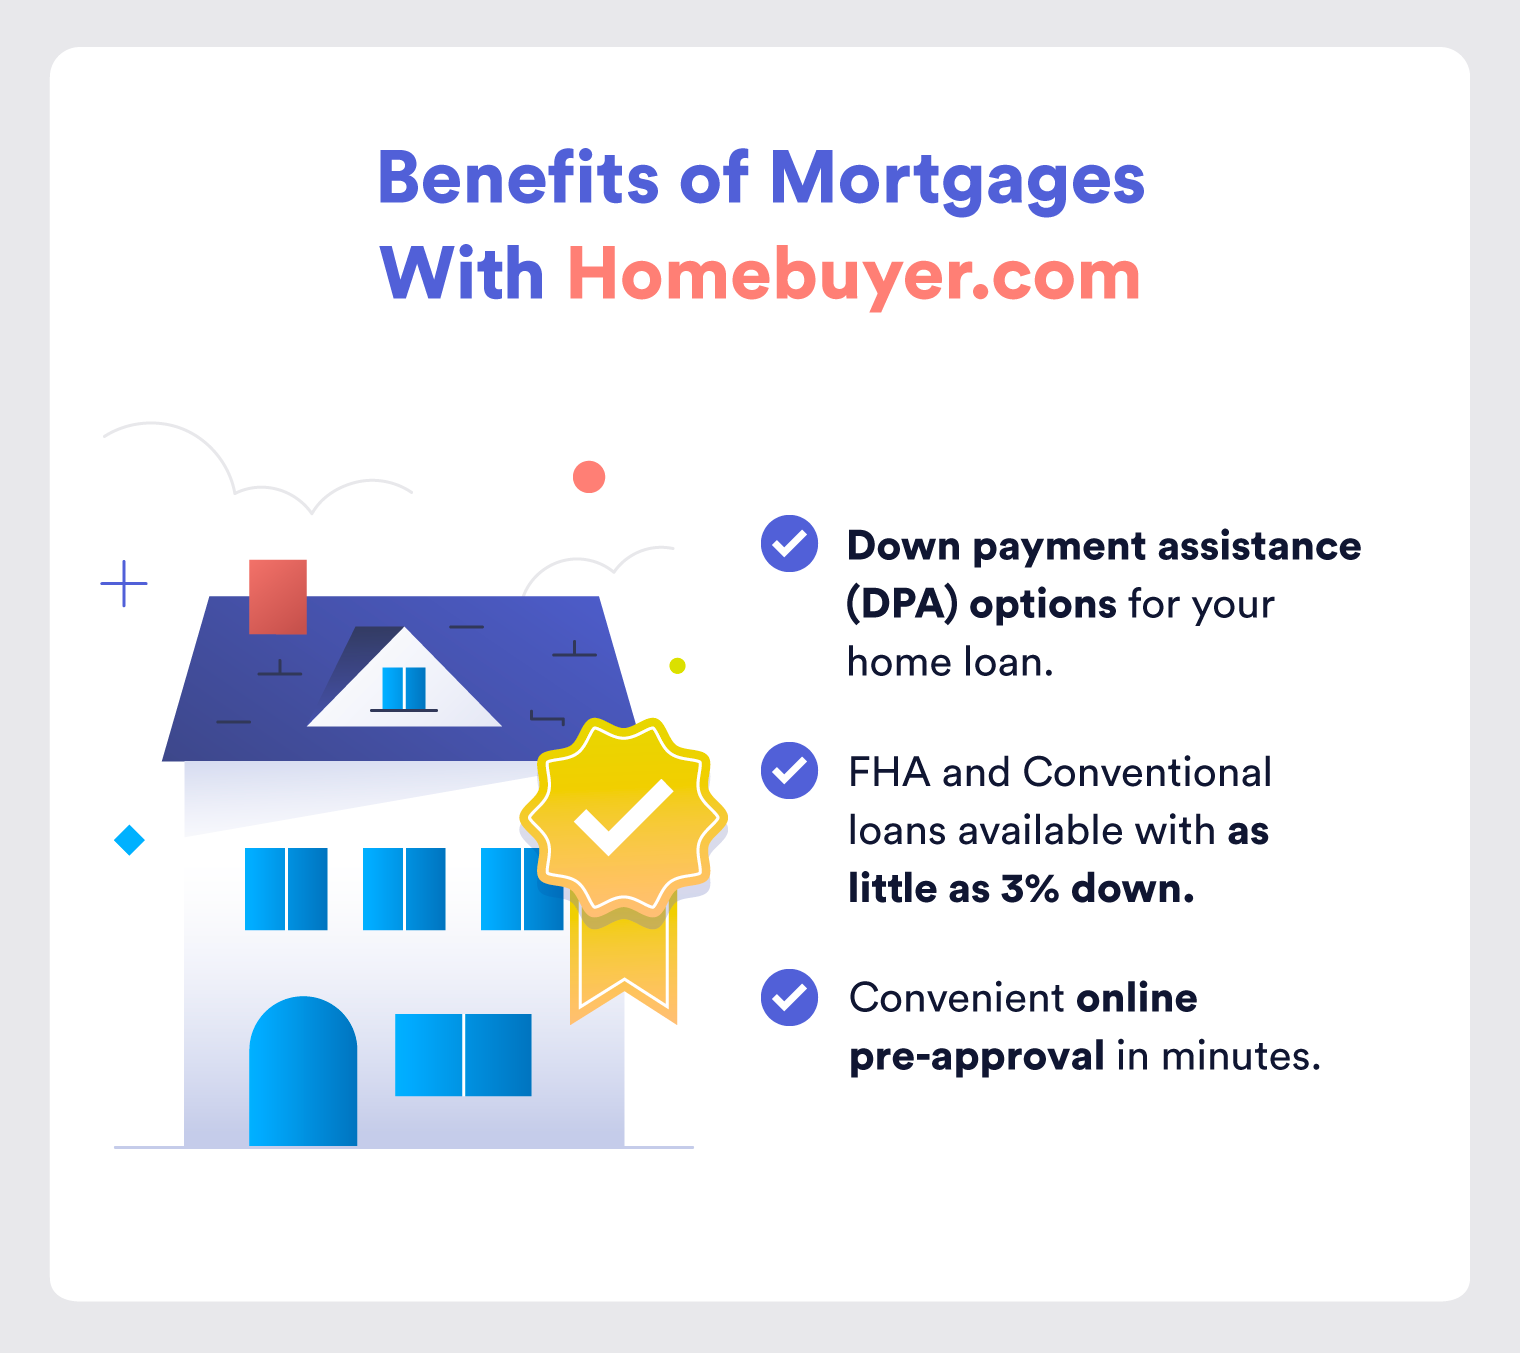 Illustration: The benefits of owning a home